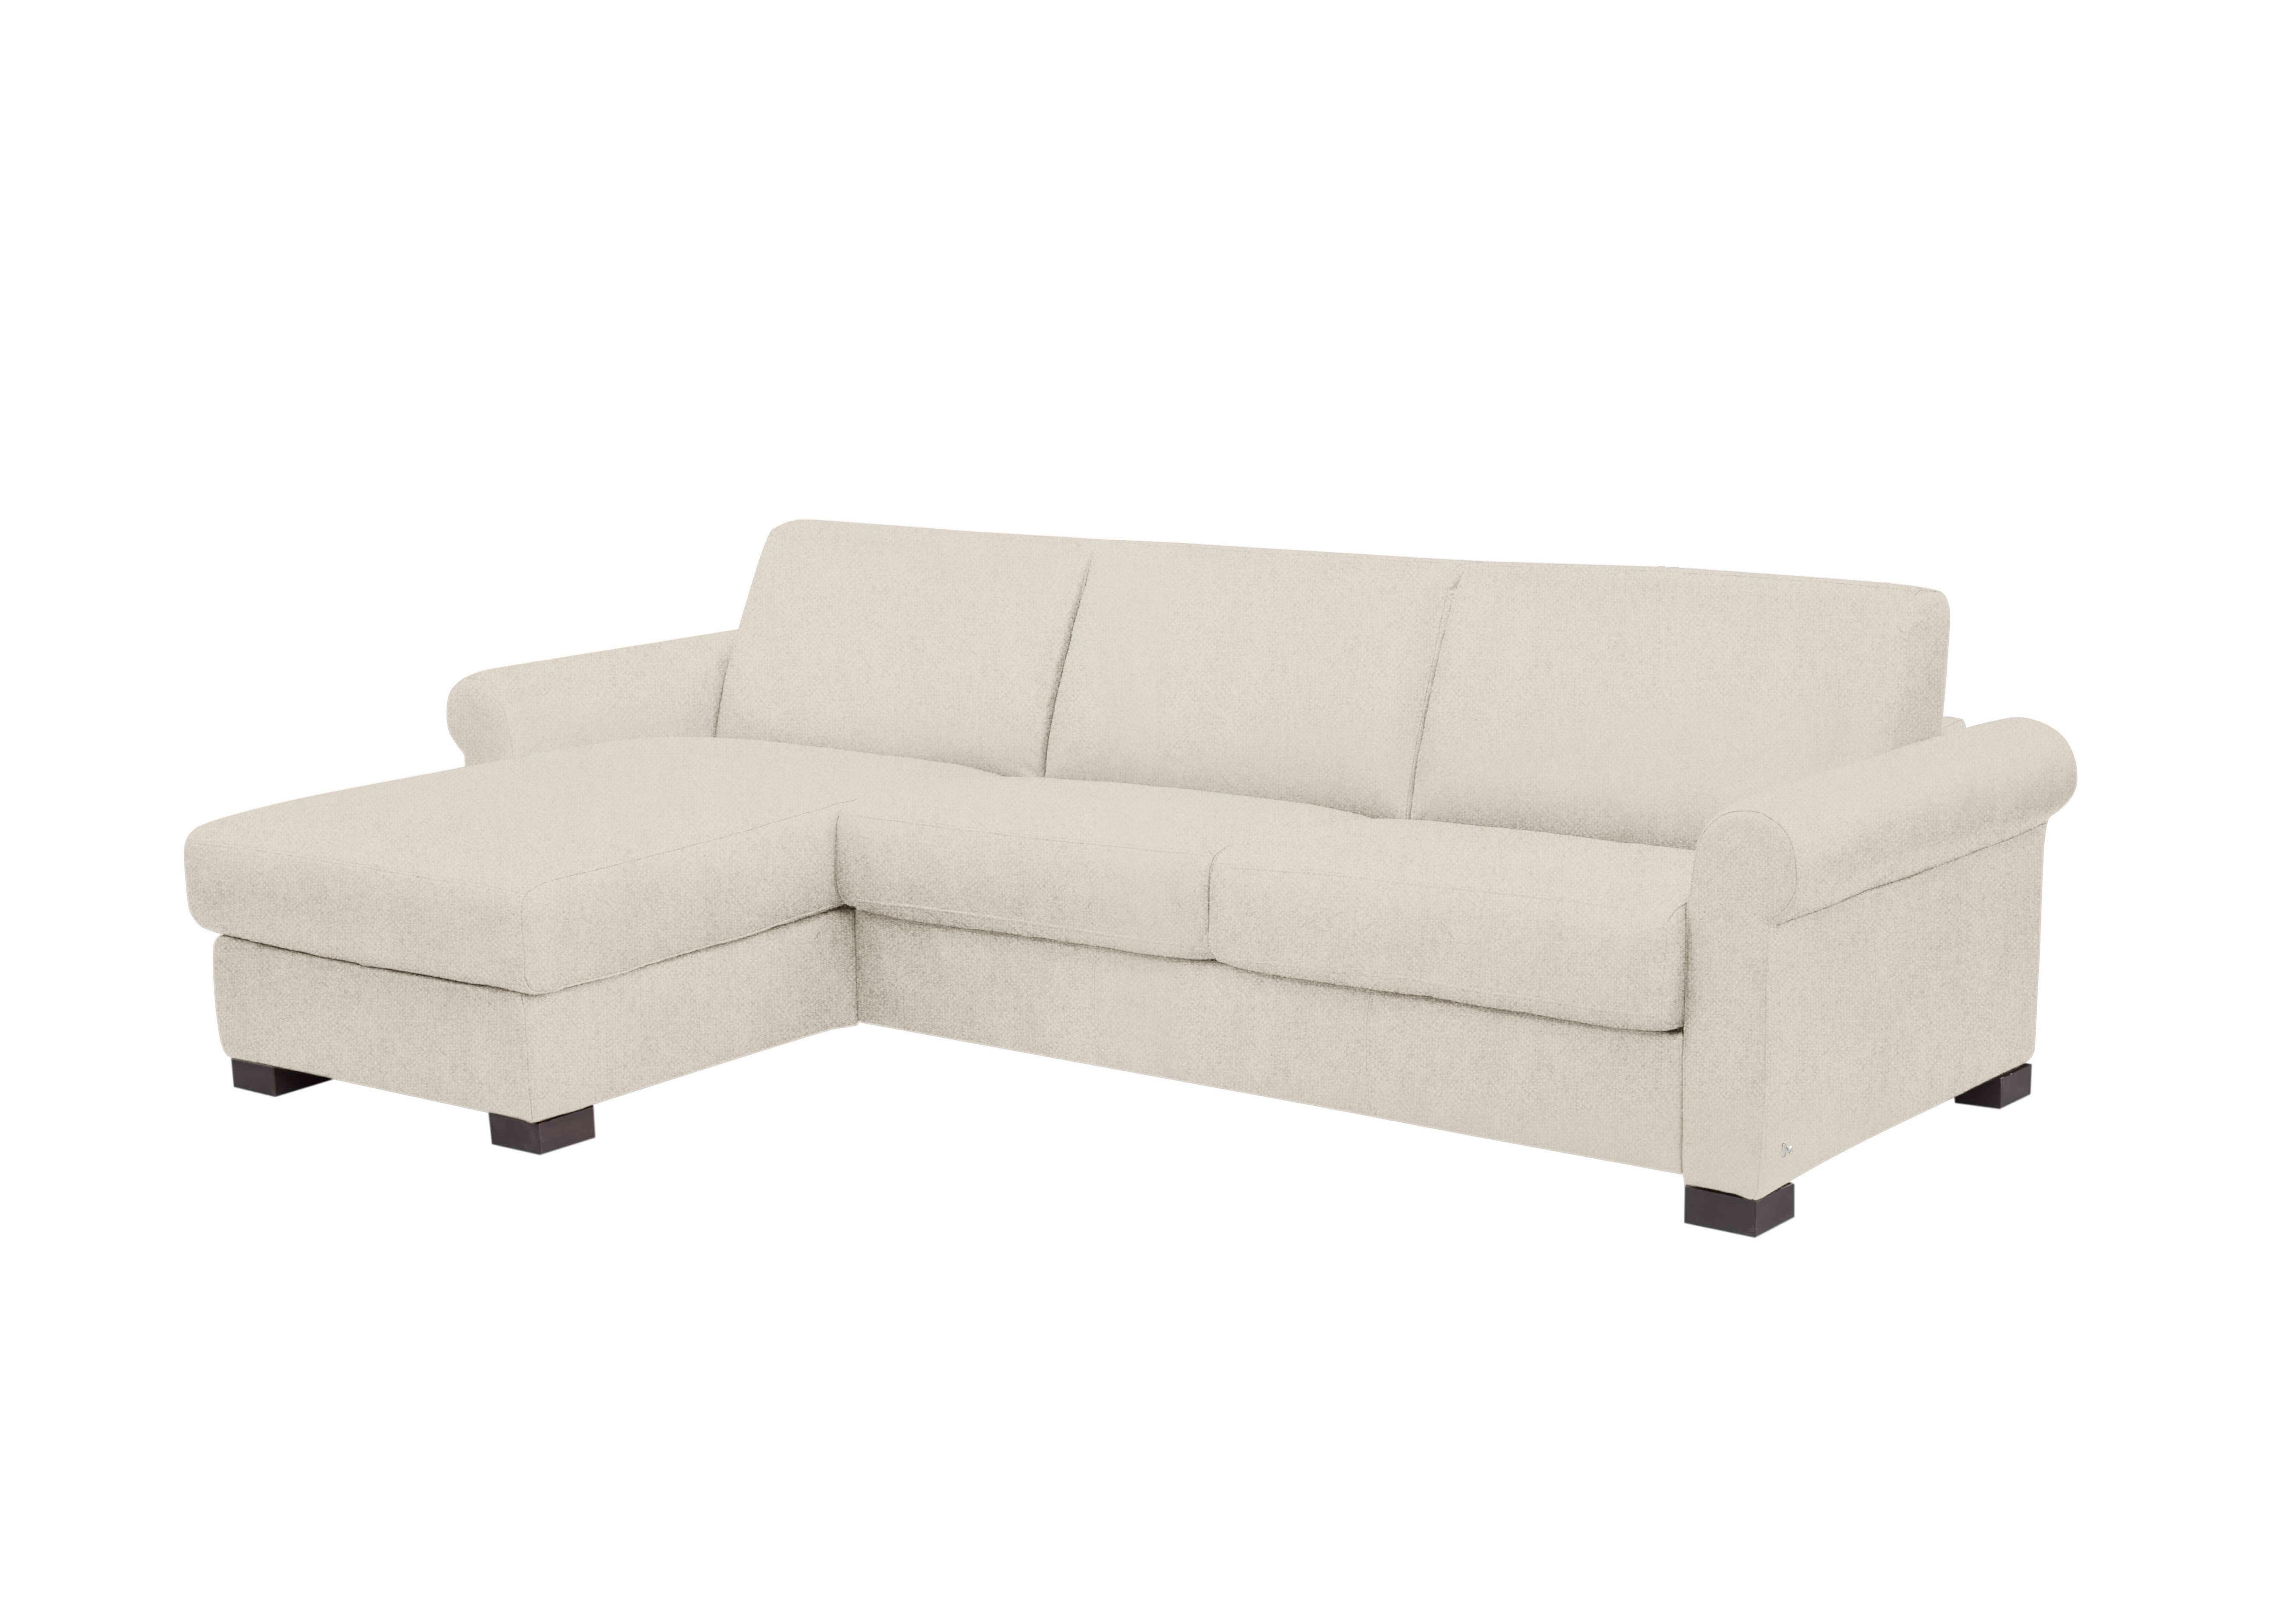 Alcova 3 Seater Fabric Sofa Bed with Storage Chaise with Scroll Arms in Fuente Beige on Furniture Village